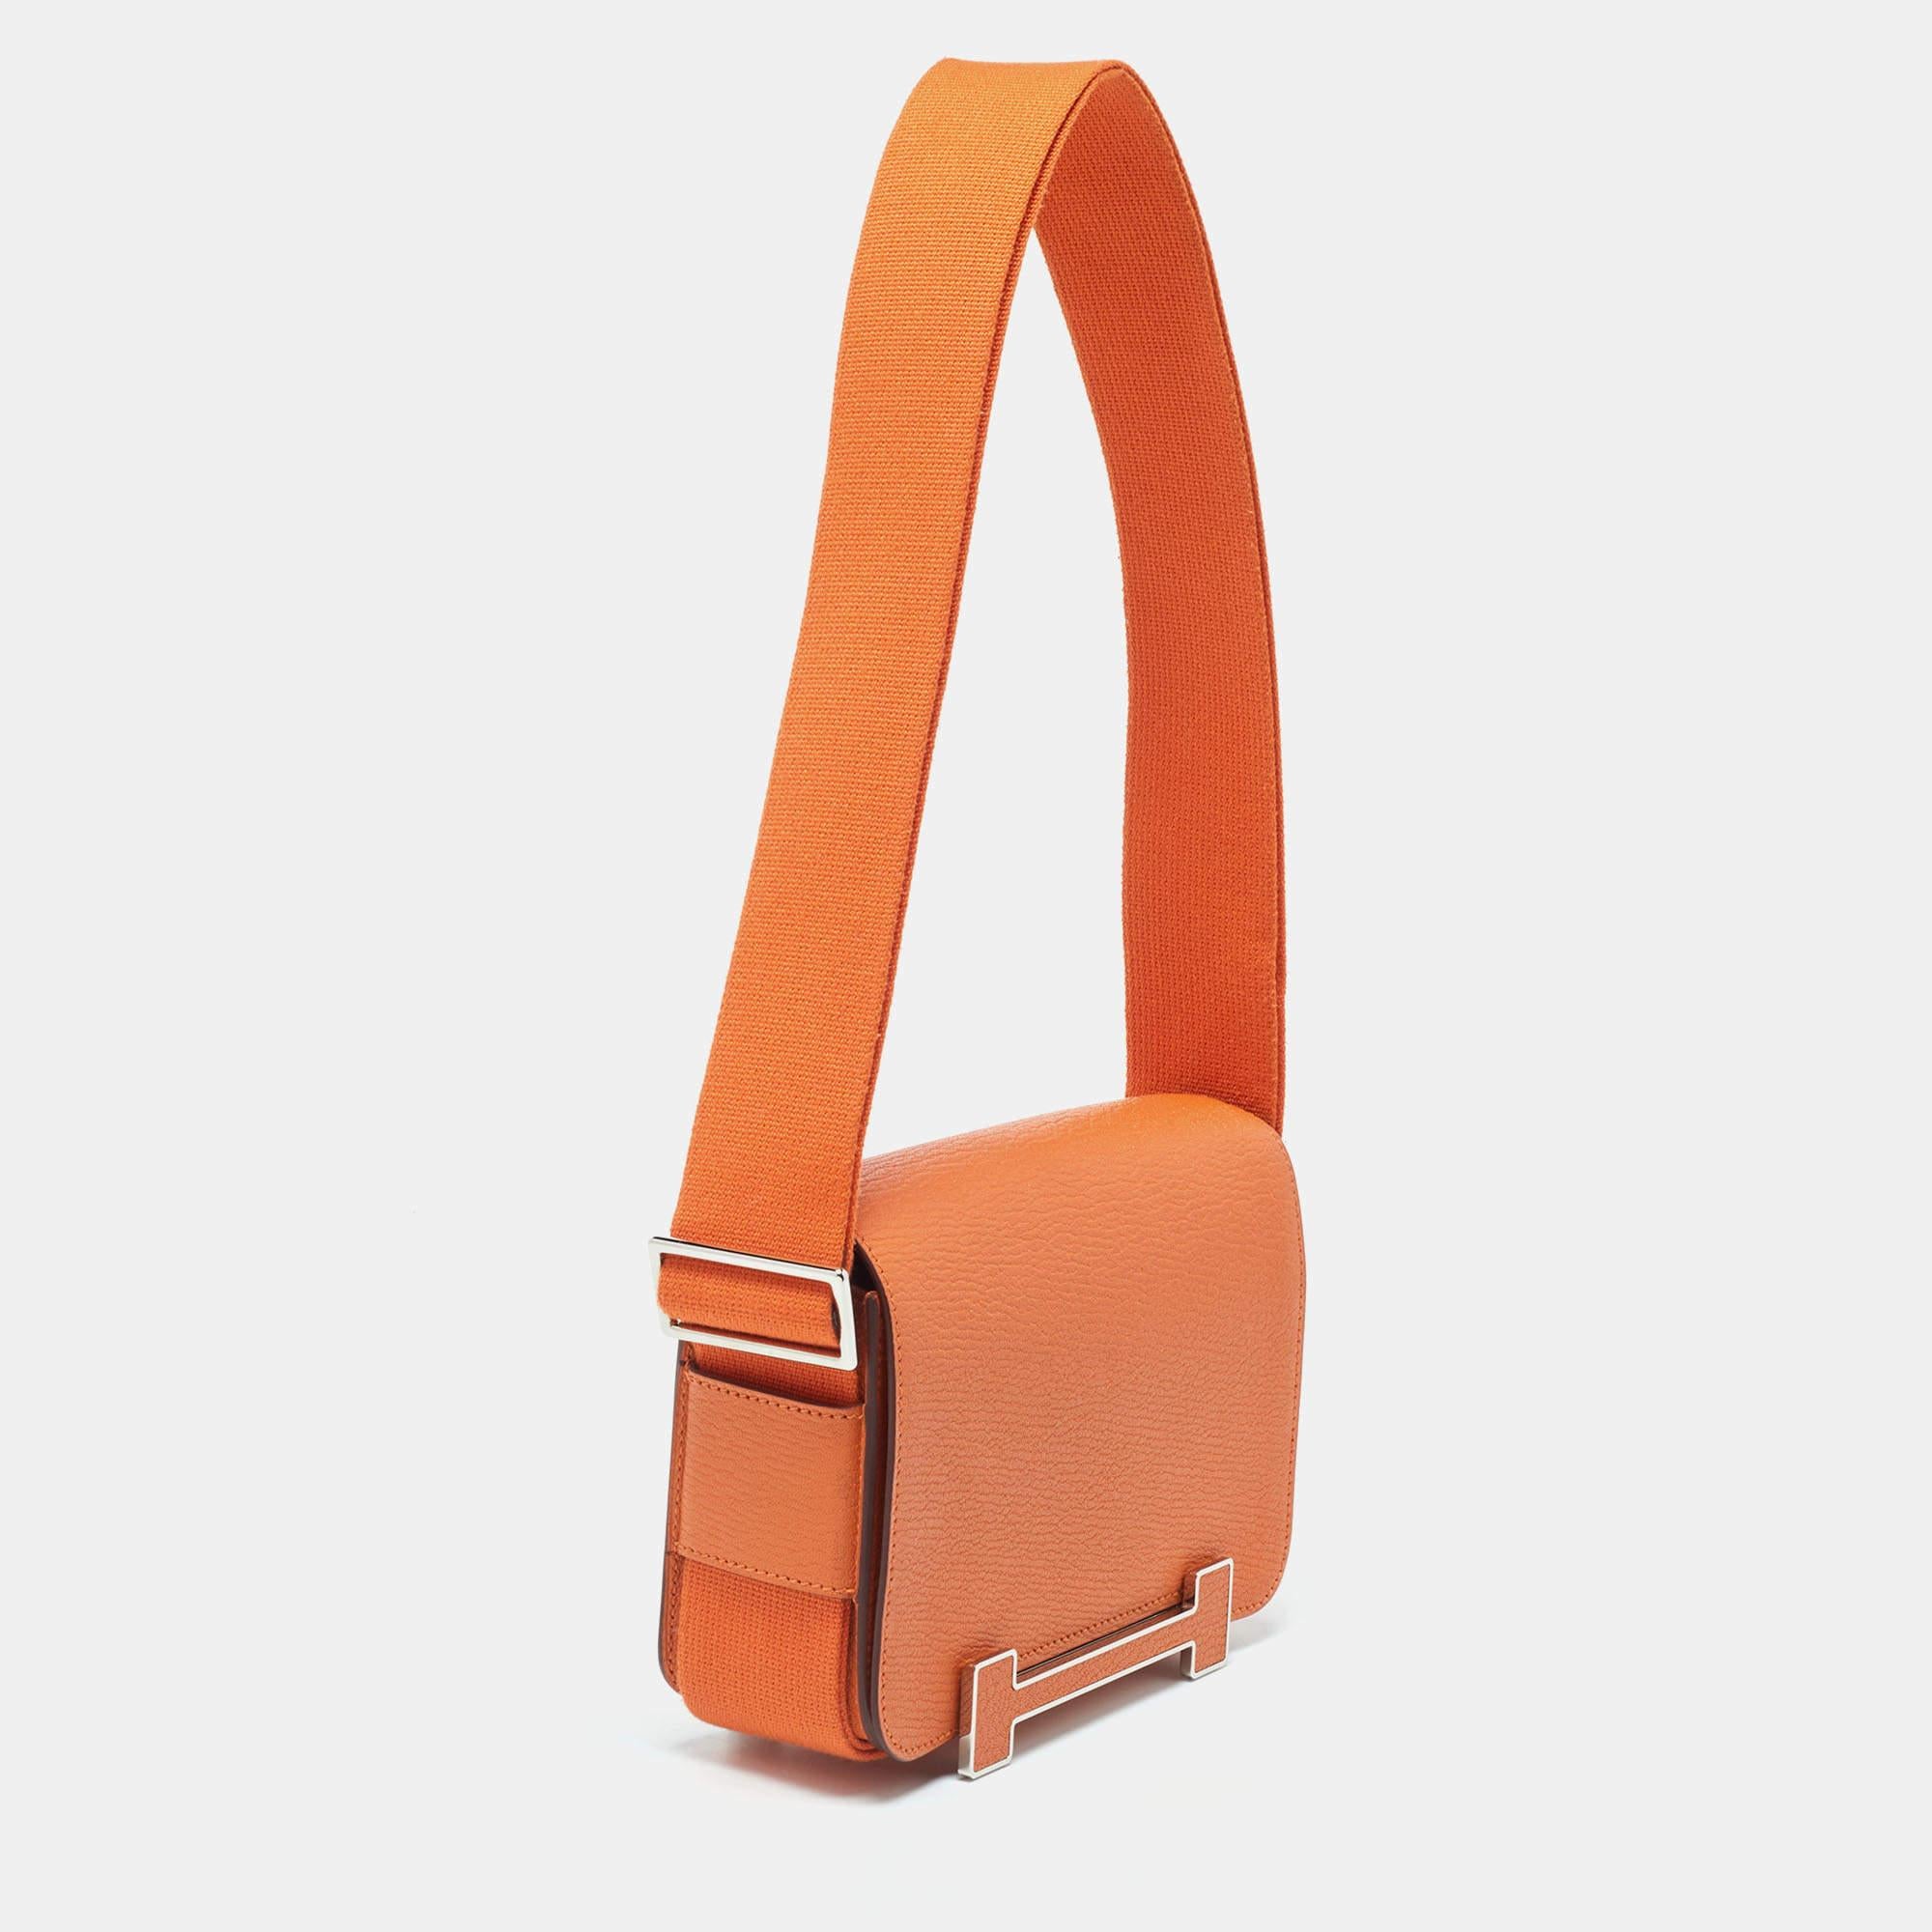 The Hermès bag is a luxurious fashion accessory. Crafted from vibrant orange Chèvre Mysore leather, it exudes elegance. The palladium-finished hardware adds a touch of sophistication. Its versatile design features a sangle strap for easy carrying,